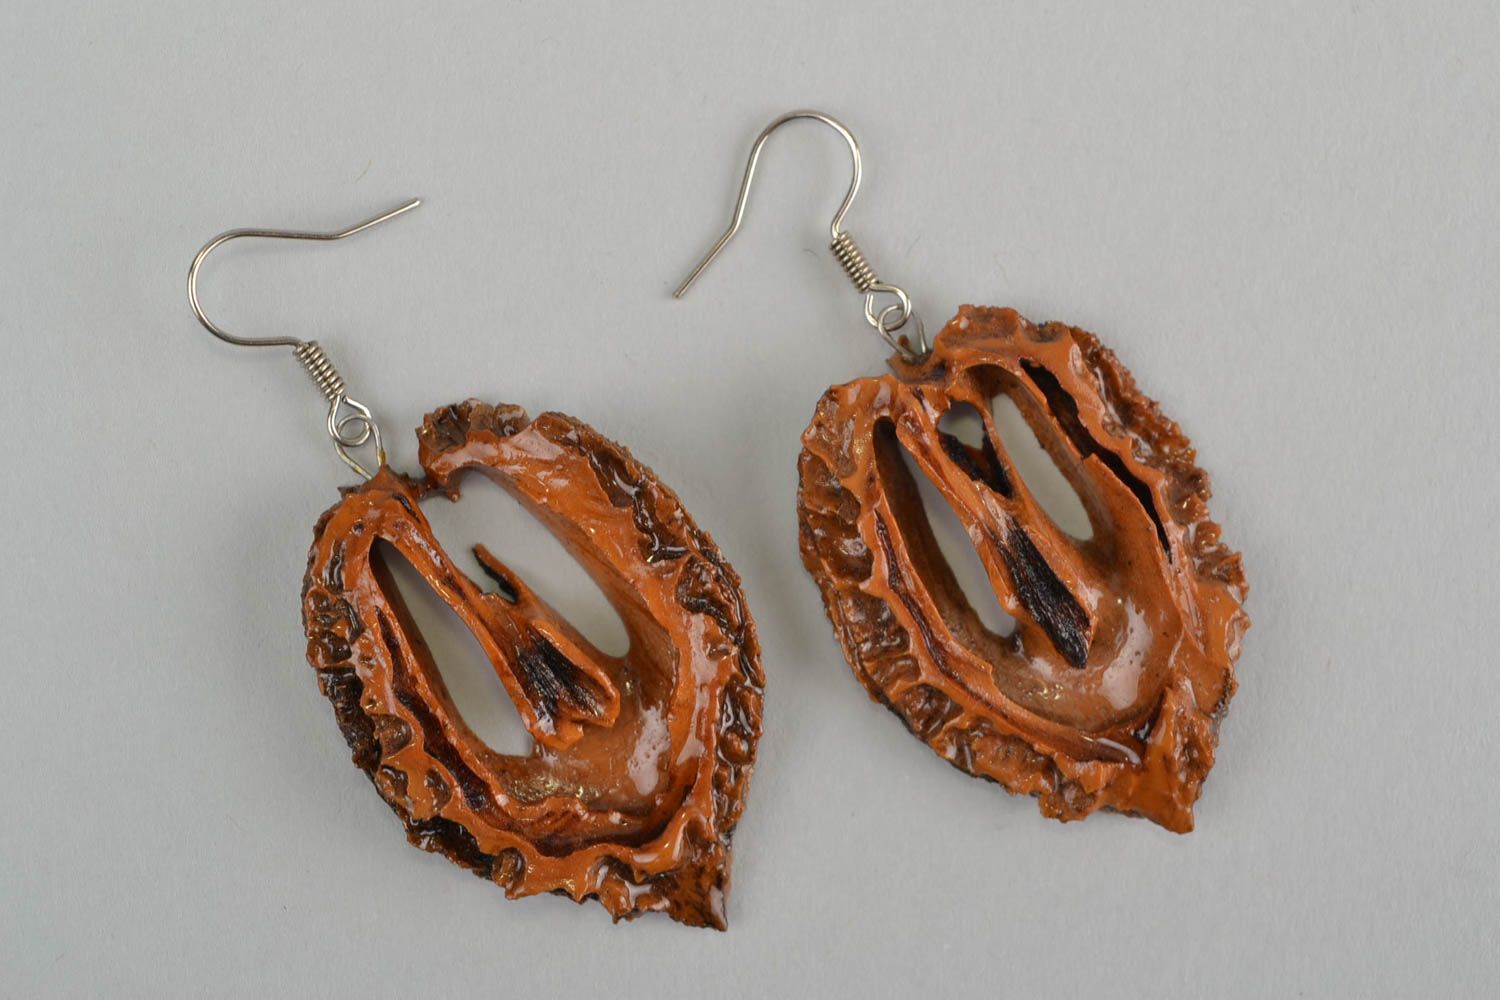 Handmade earrings wooden jewelry unique earrings women accessories gifts for her photo 2